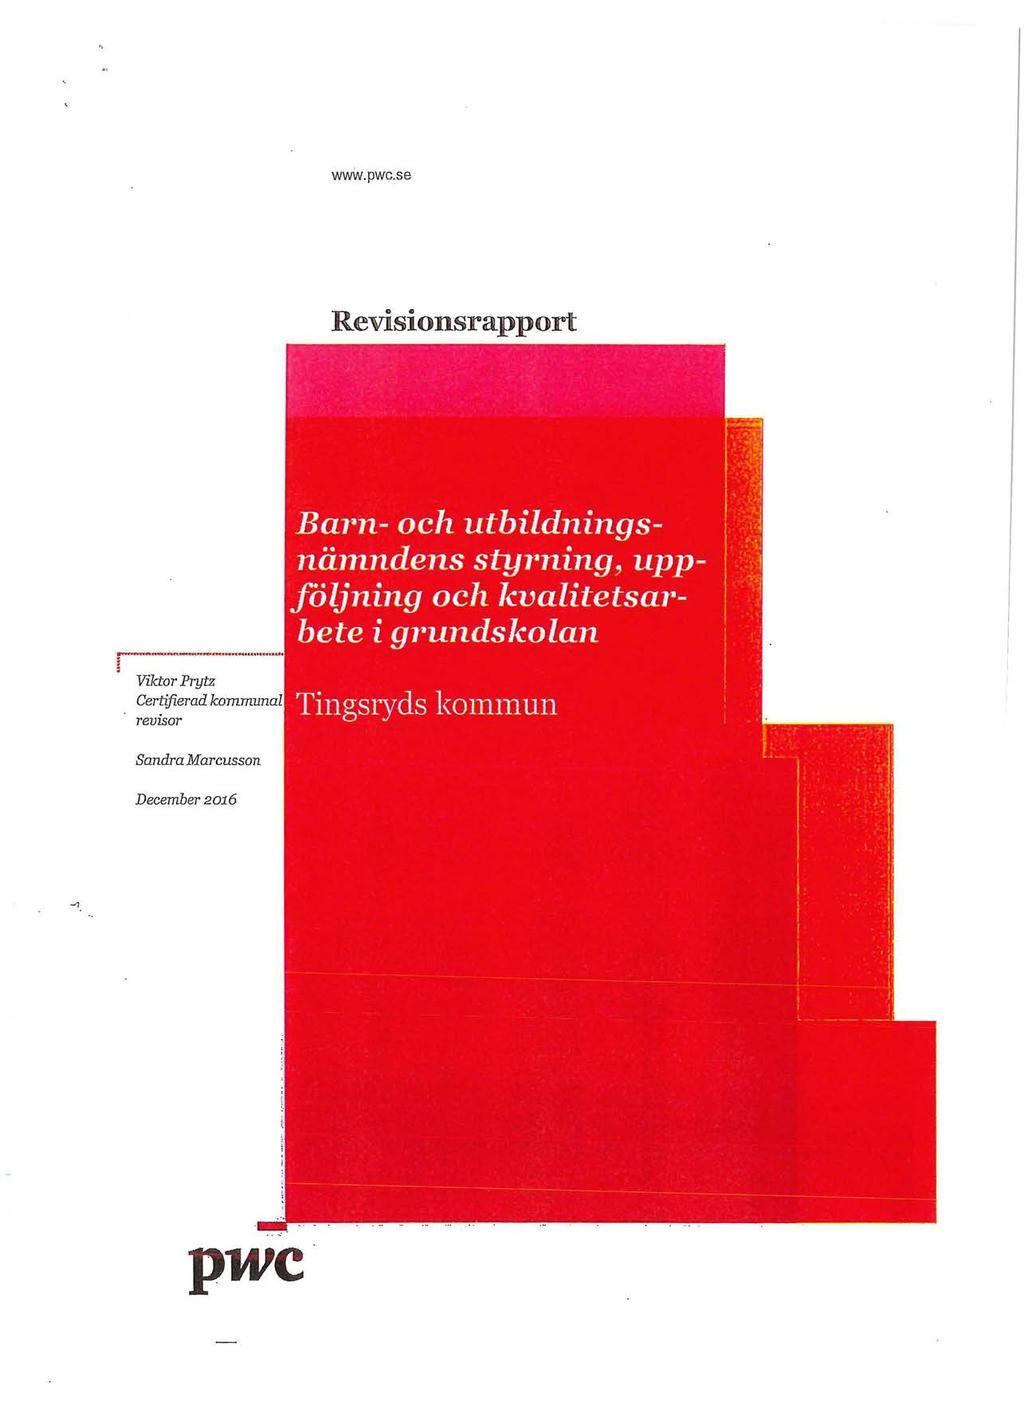 www.pwc.se Revisionsrapport ~- - - ---- - -.